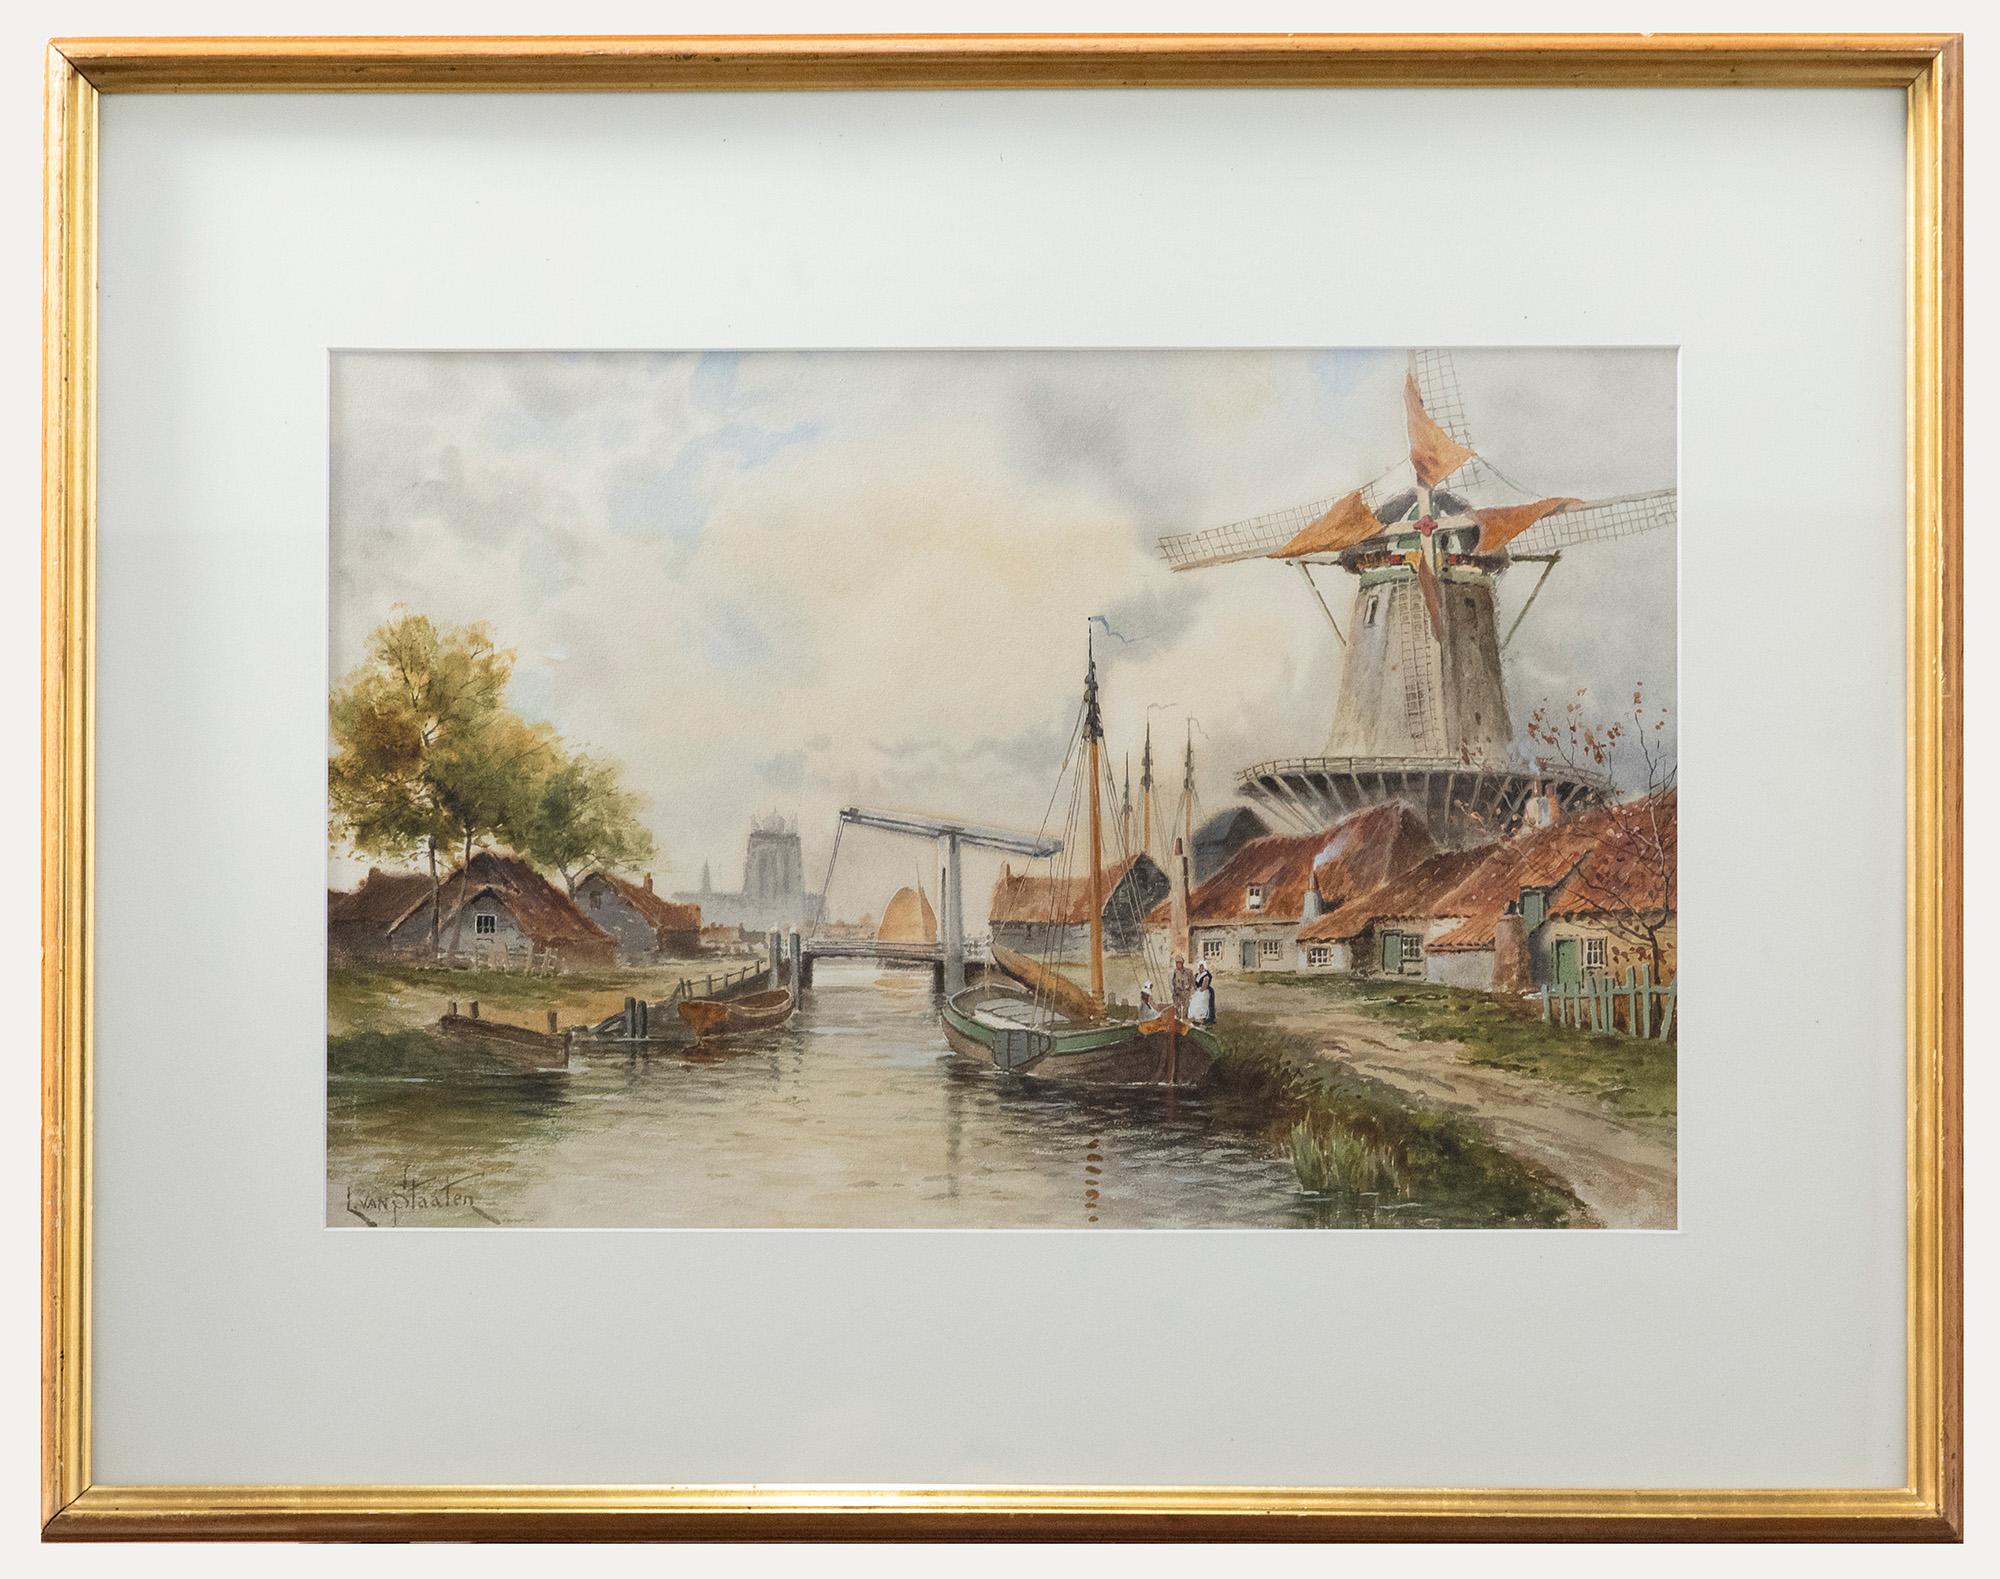 An original watercolour by Dutch painter Louis Van Staaten, also known as Hermanus II Koekkoek (1836-1909). Signed to the lower left. Well-presented in a large wooden frame with gilt window. On paper. 